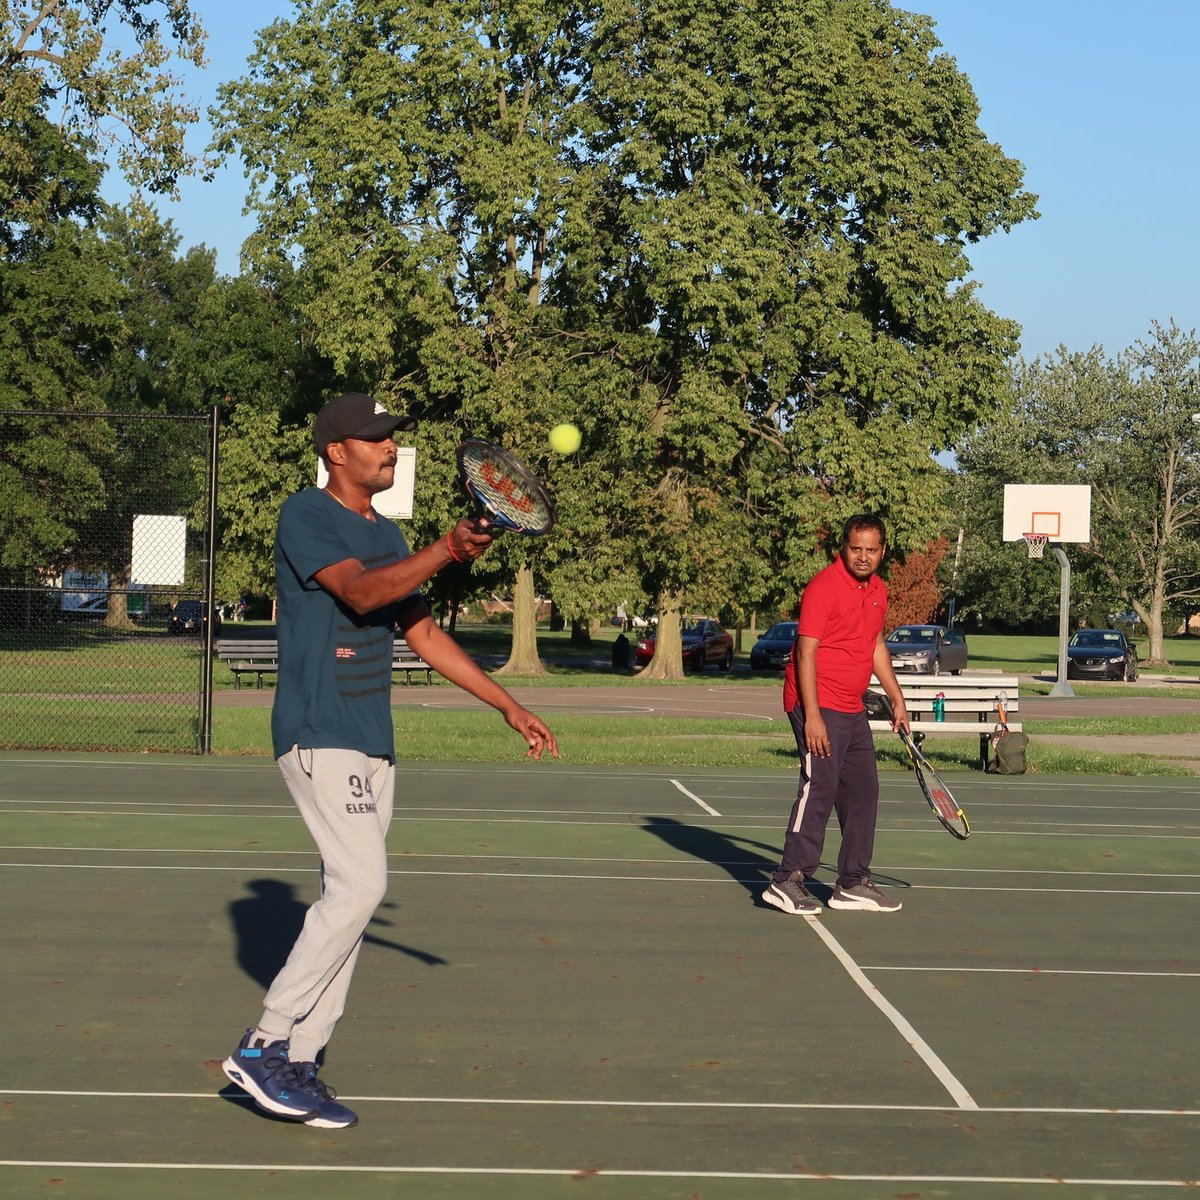 Take your tennis game to the next level by registering for our adult tennis leagues! 🎾 You'll play eight weeks of games with one match per week against other tennis enthusiasts. Top teams will be invited to a tournament. @ColsRecParks LEARN MORE ▶️ bit.ly/3UmQPwd